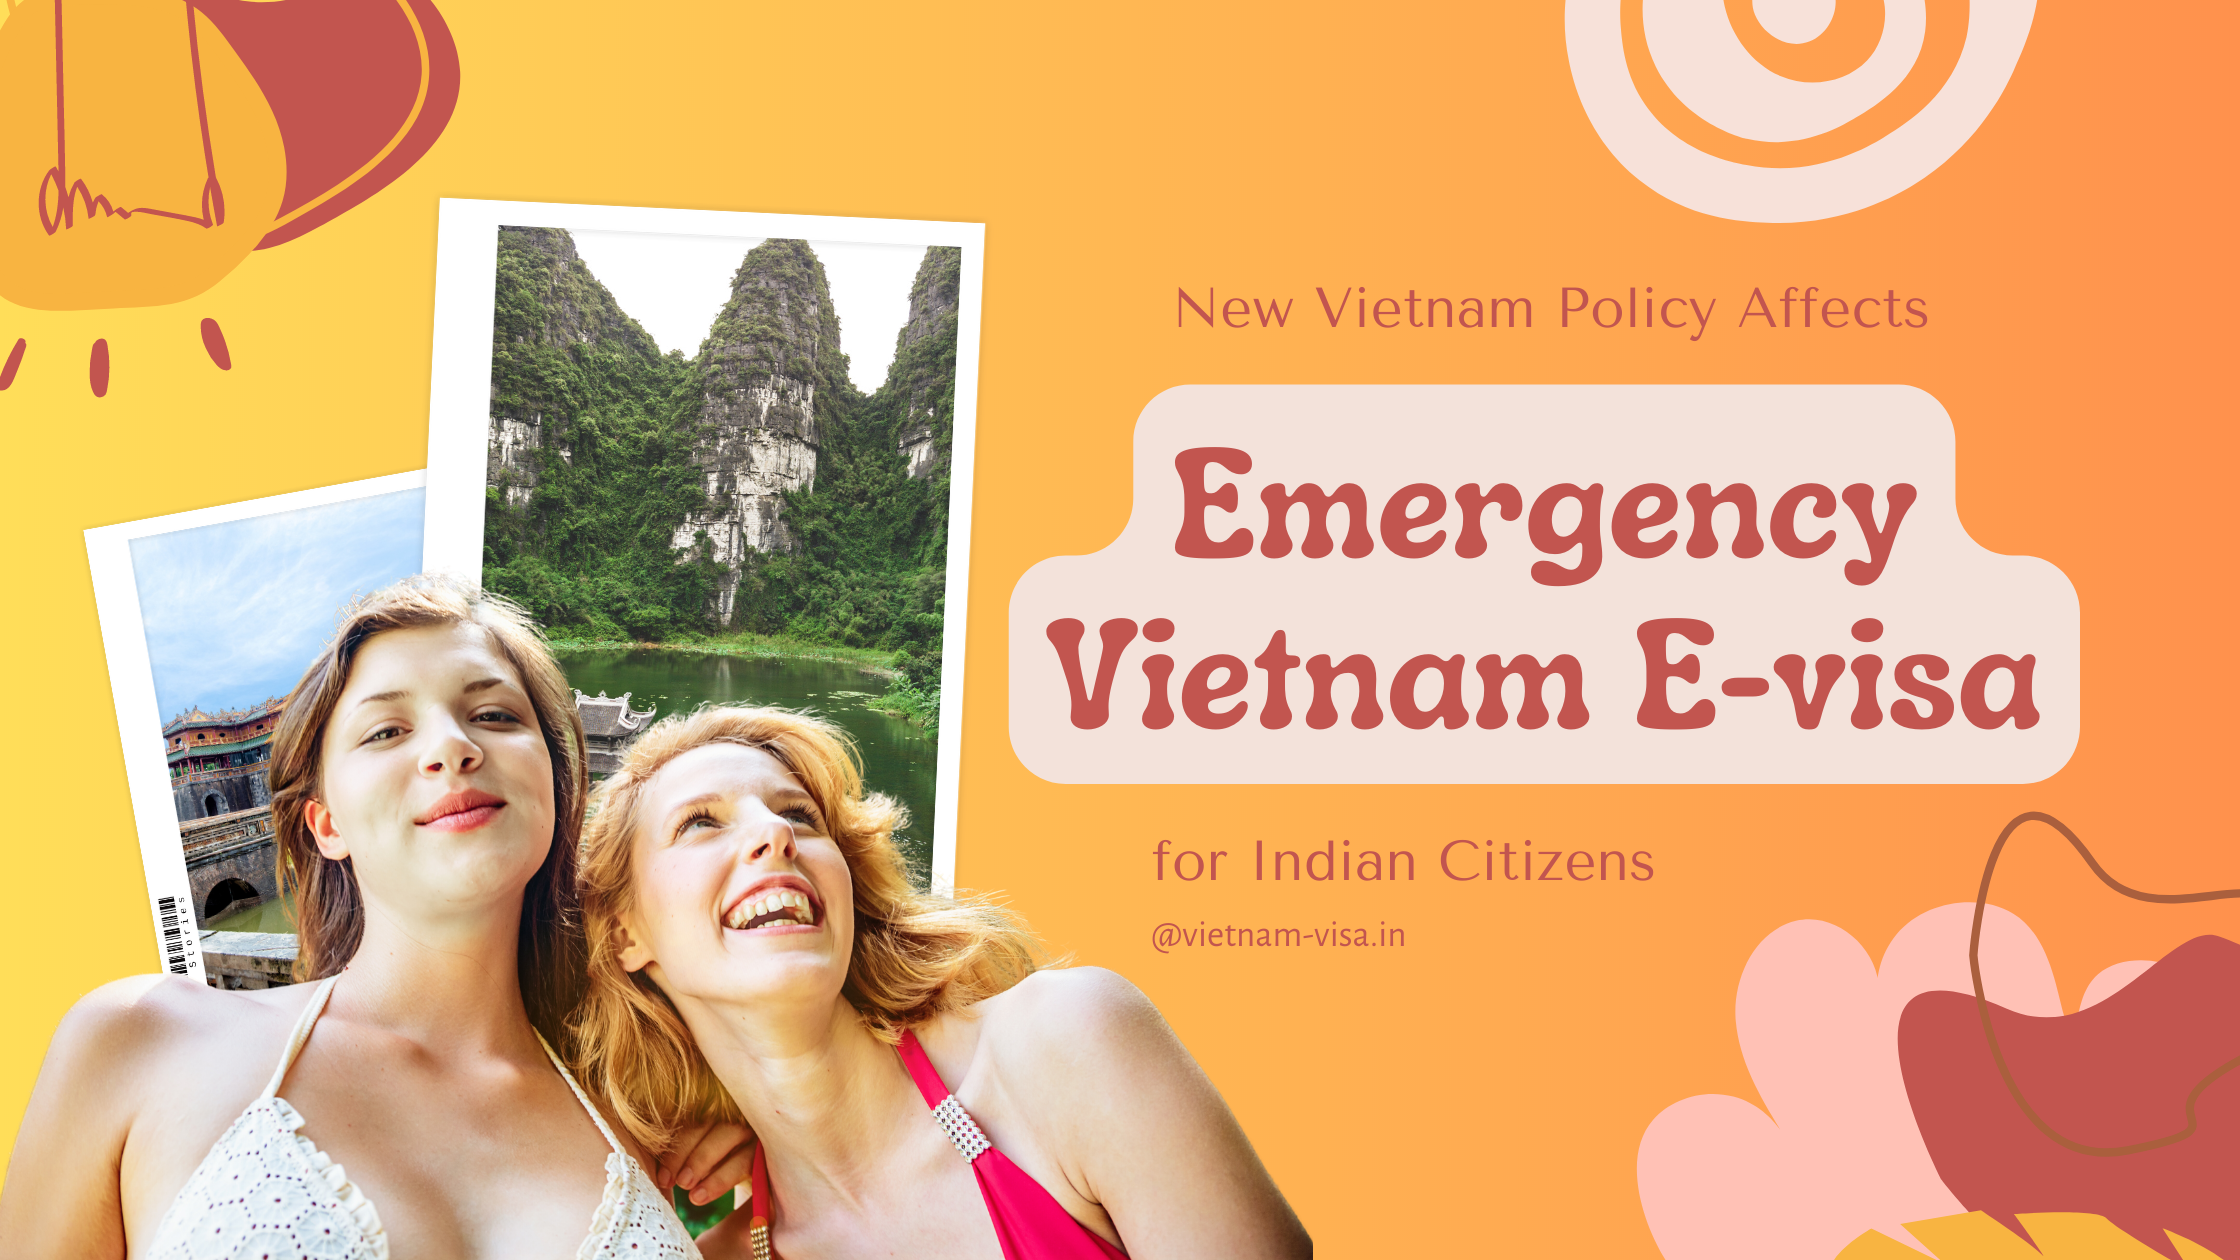 New-Vietnam-E-Visa-Policy-Affects-the-Emergency-Vietnam-E-visa-Services-for-Indian-citizens-2023-2024